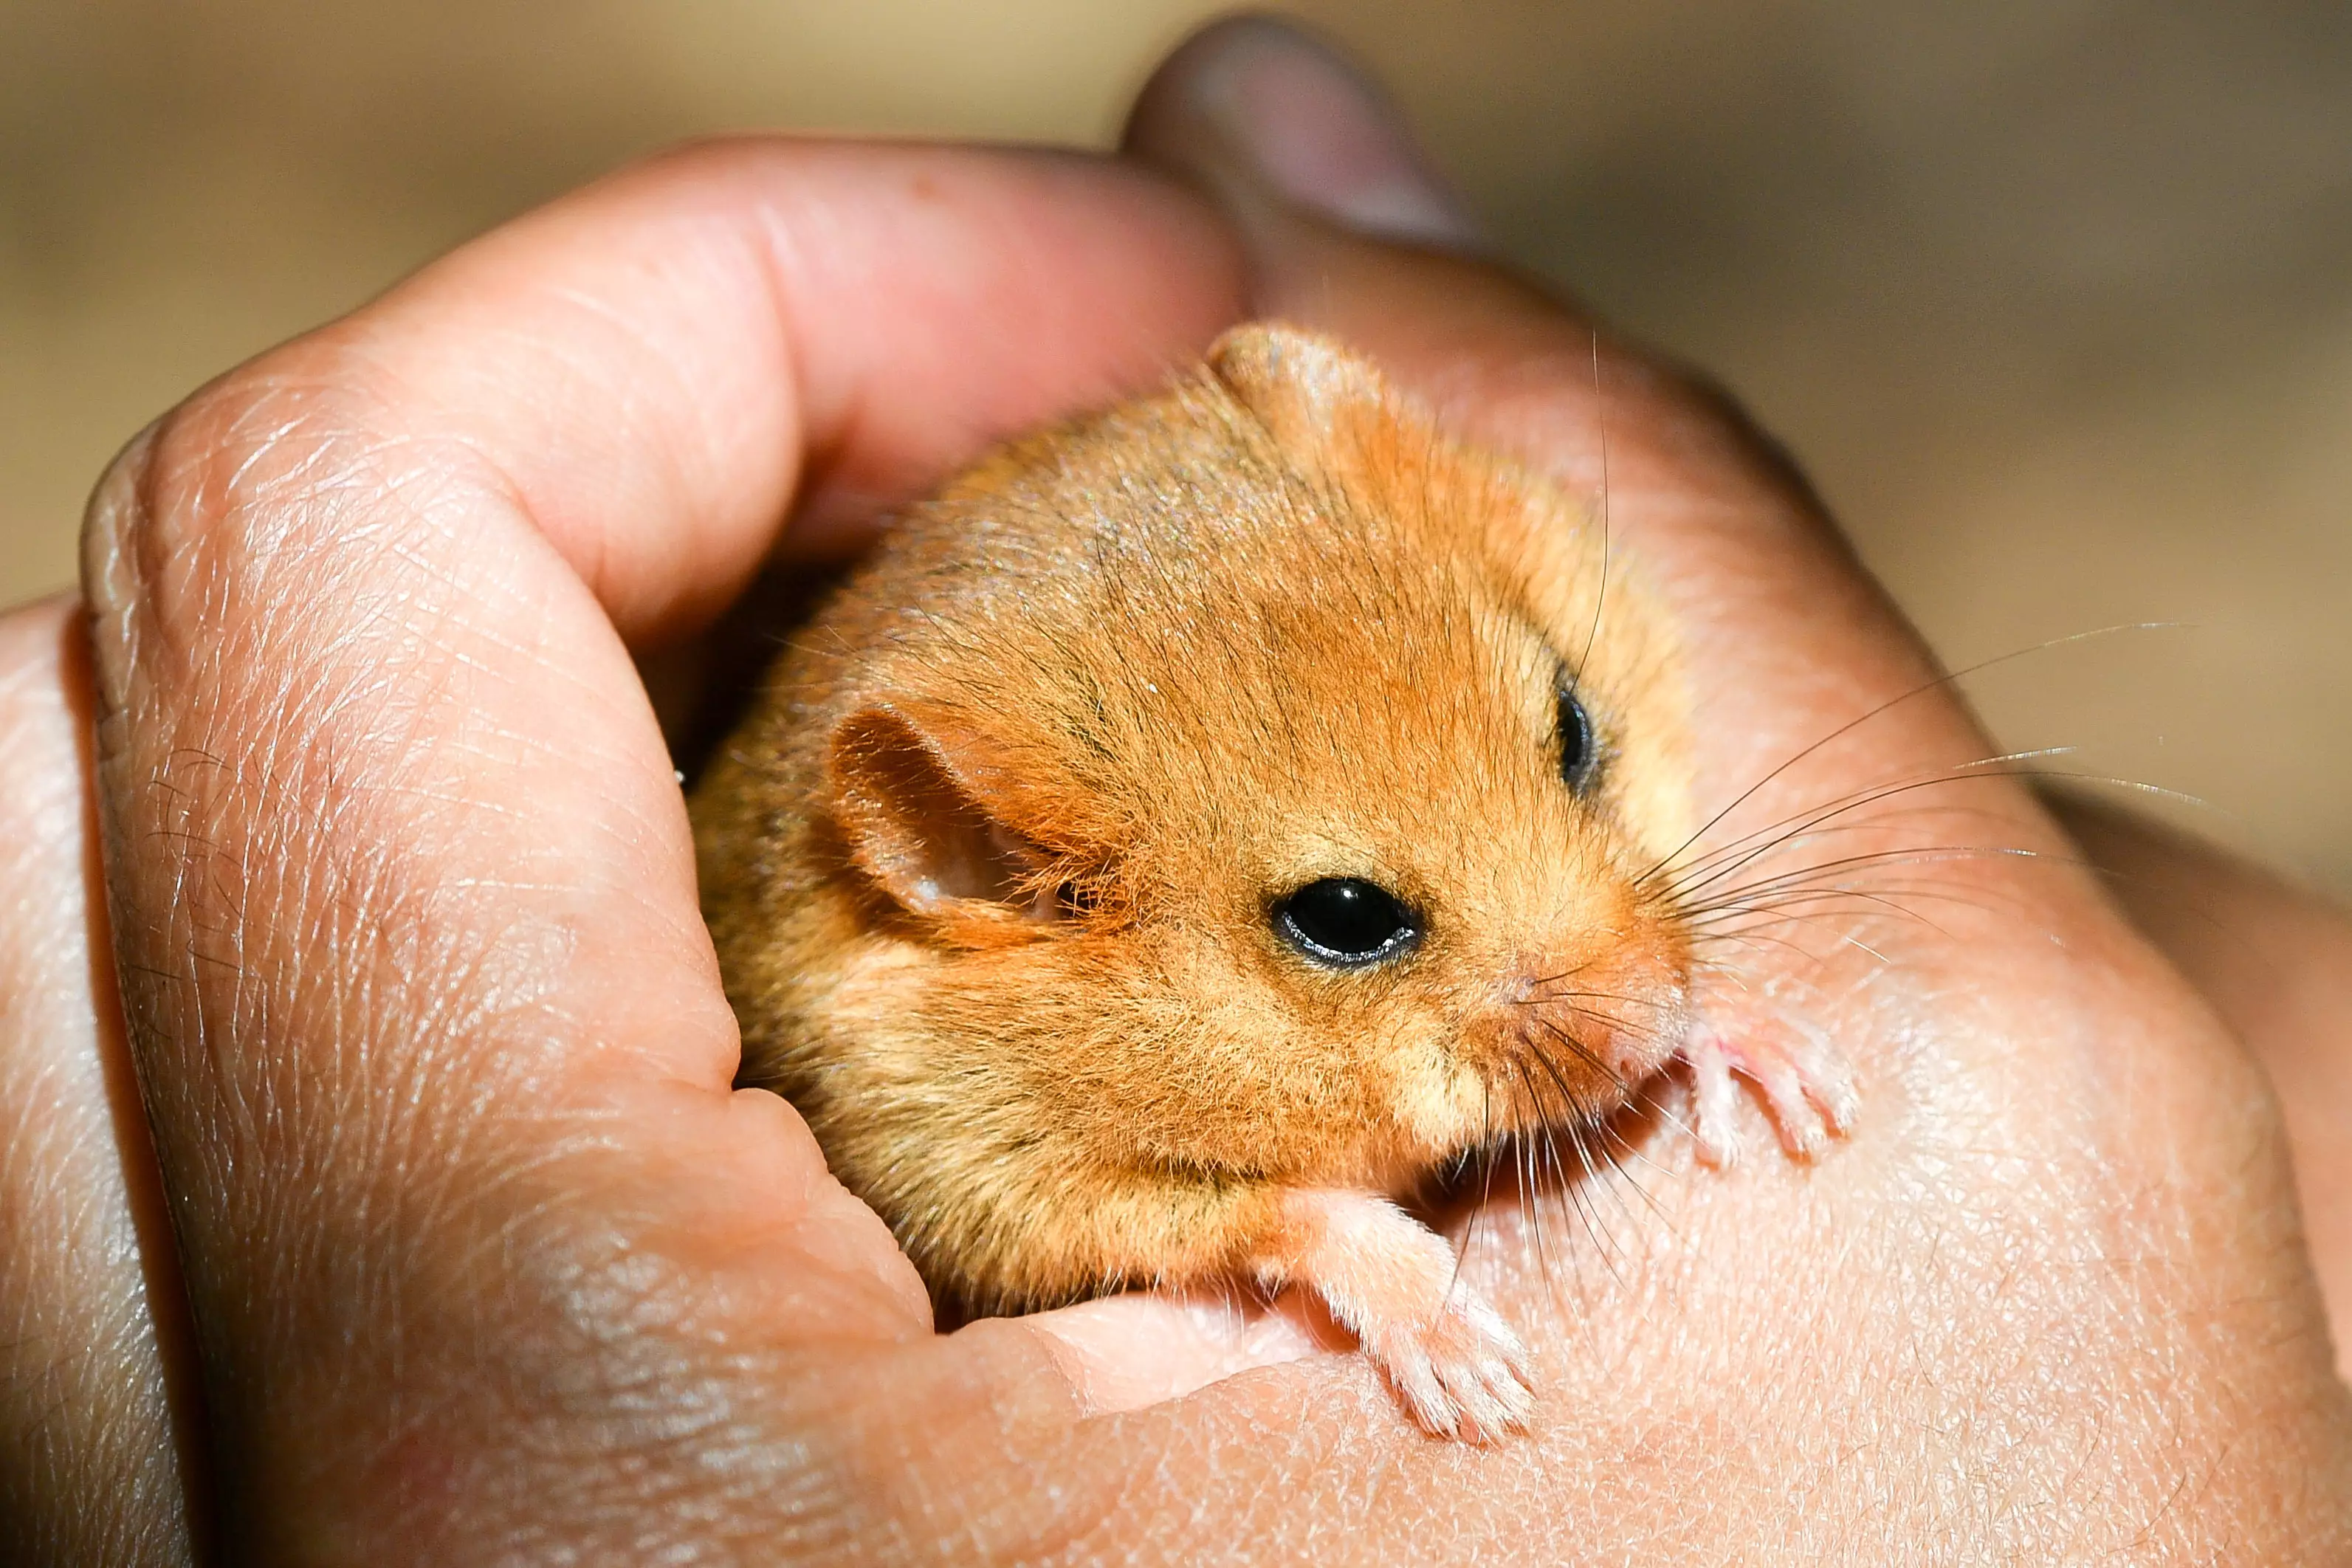 Clearly, we cannot allow an animal as cute as the hazel dormouse to become extinct.